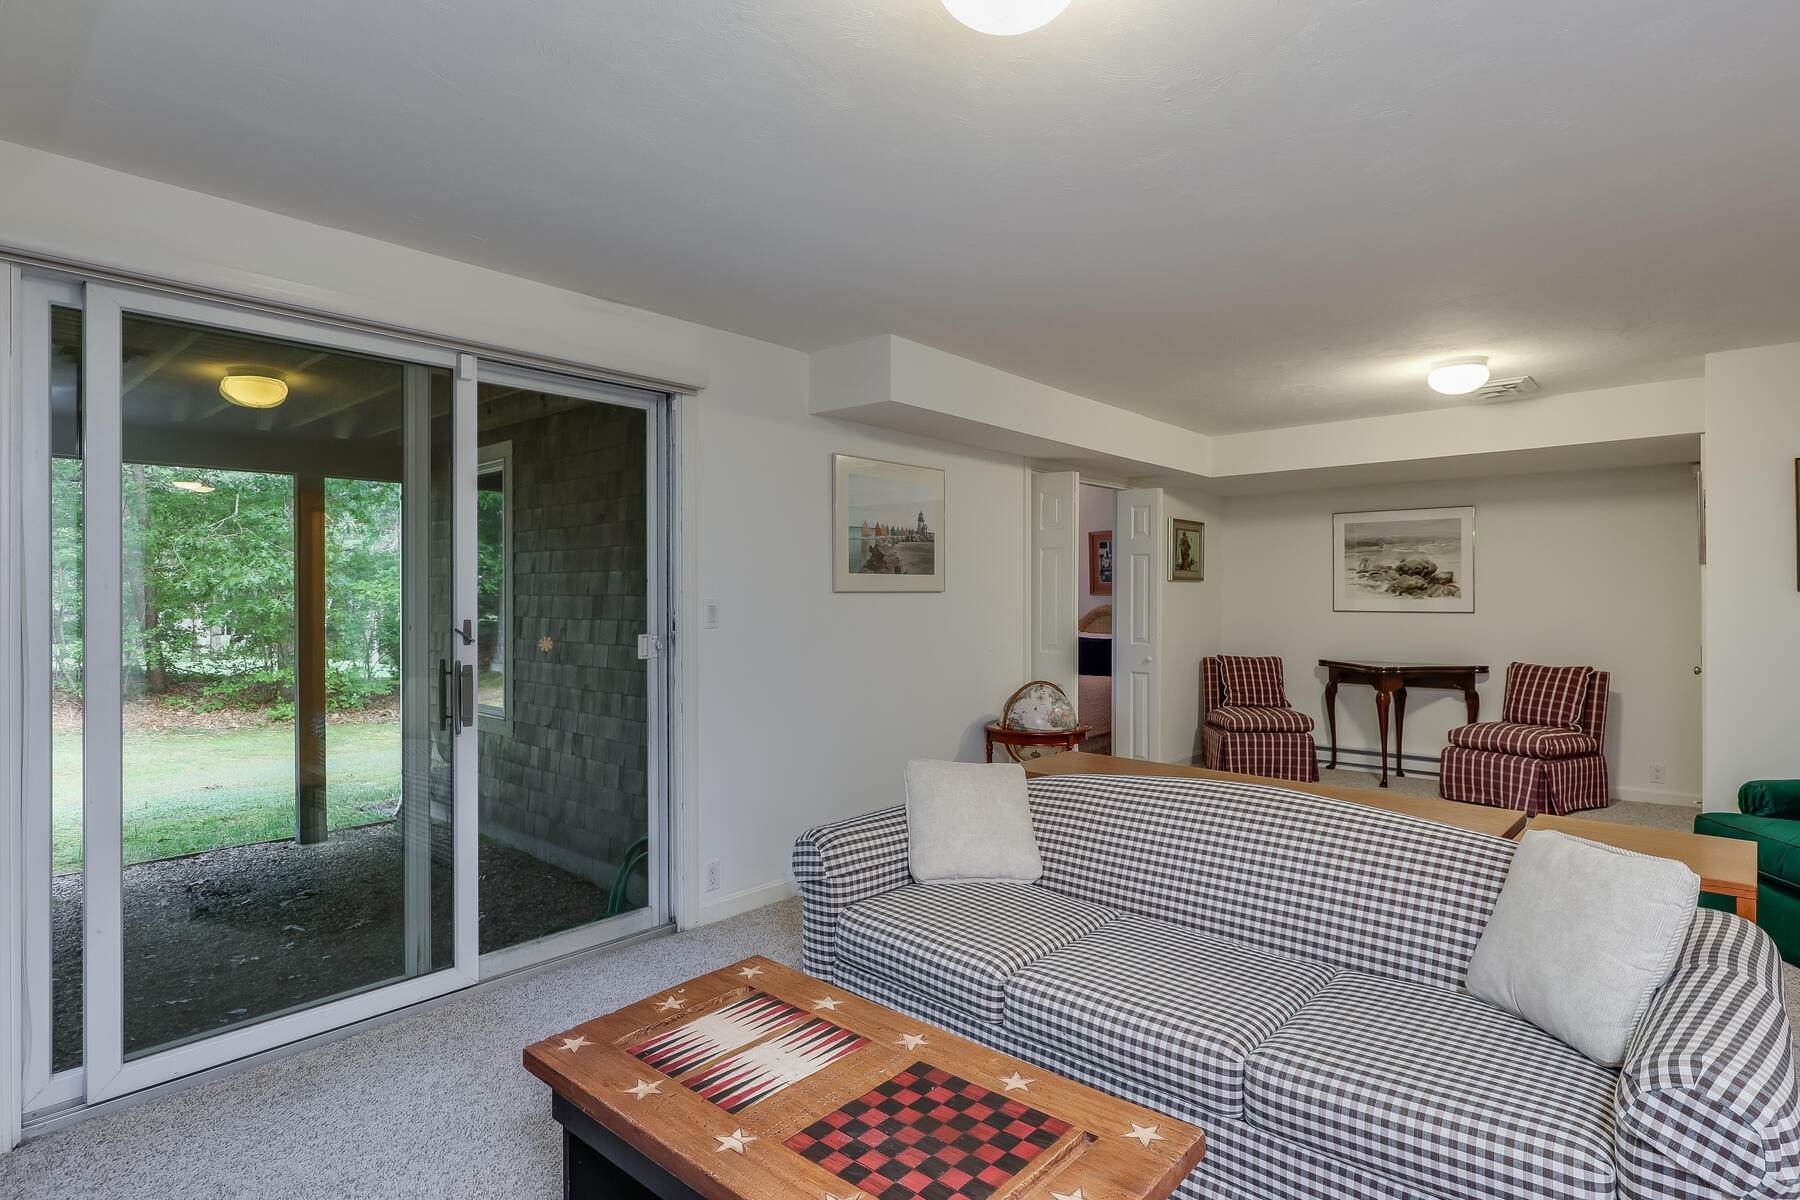 28. Condominiums for Sale at 28 West Woods Village, Yarmouth Port, MA, 02675 28 West Woods Village Yarmouth Port, Massachusetts 02675 United States